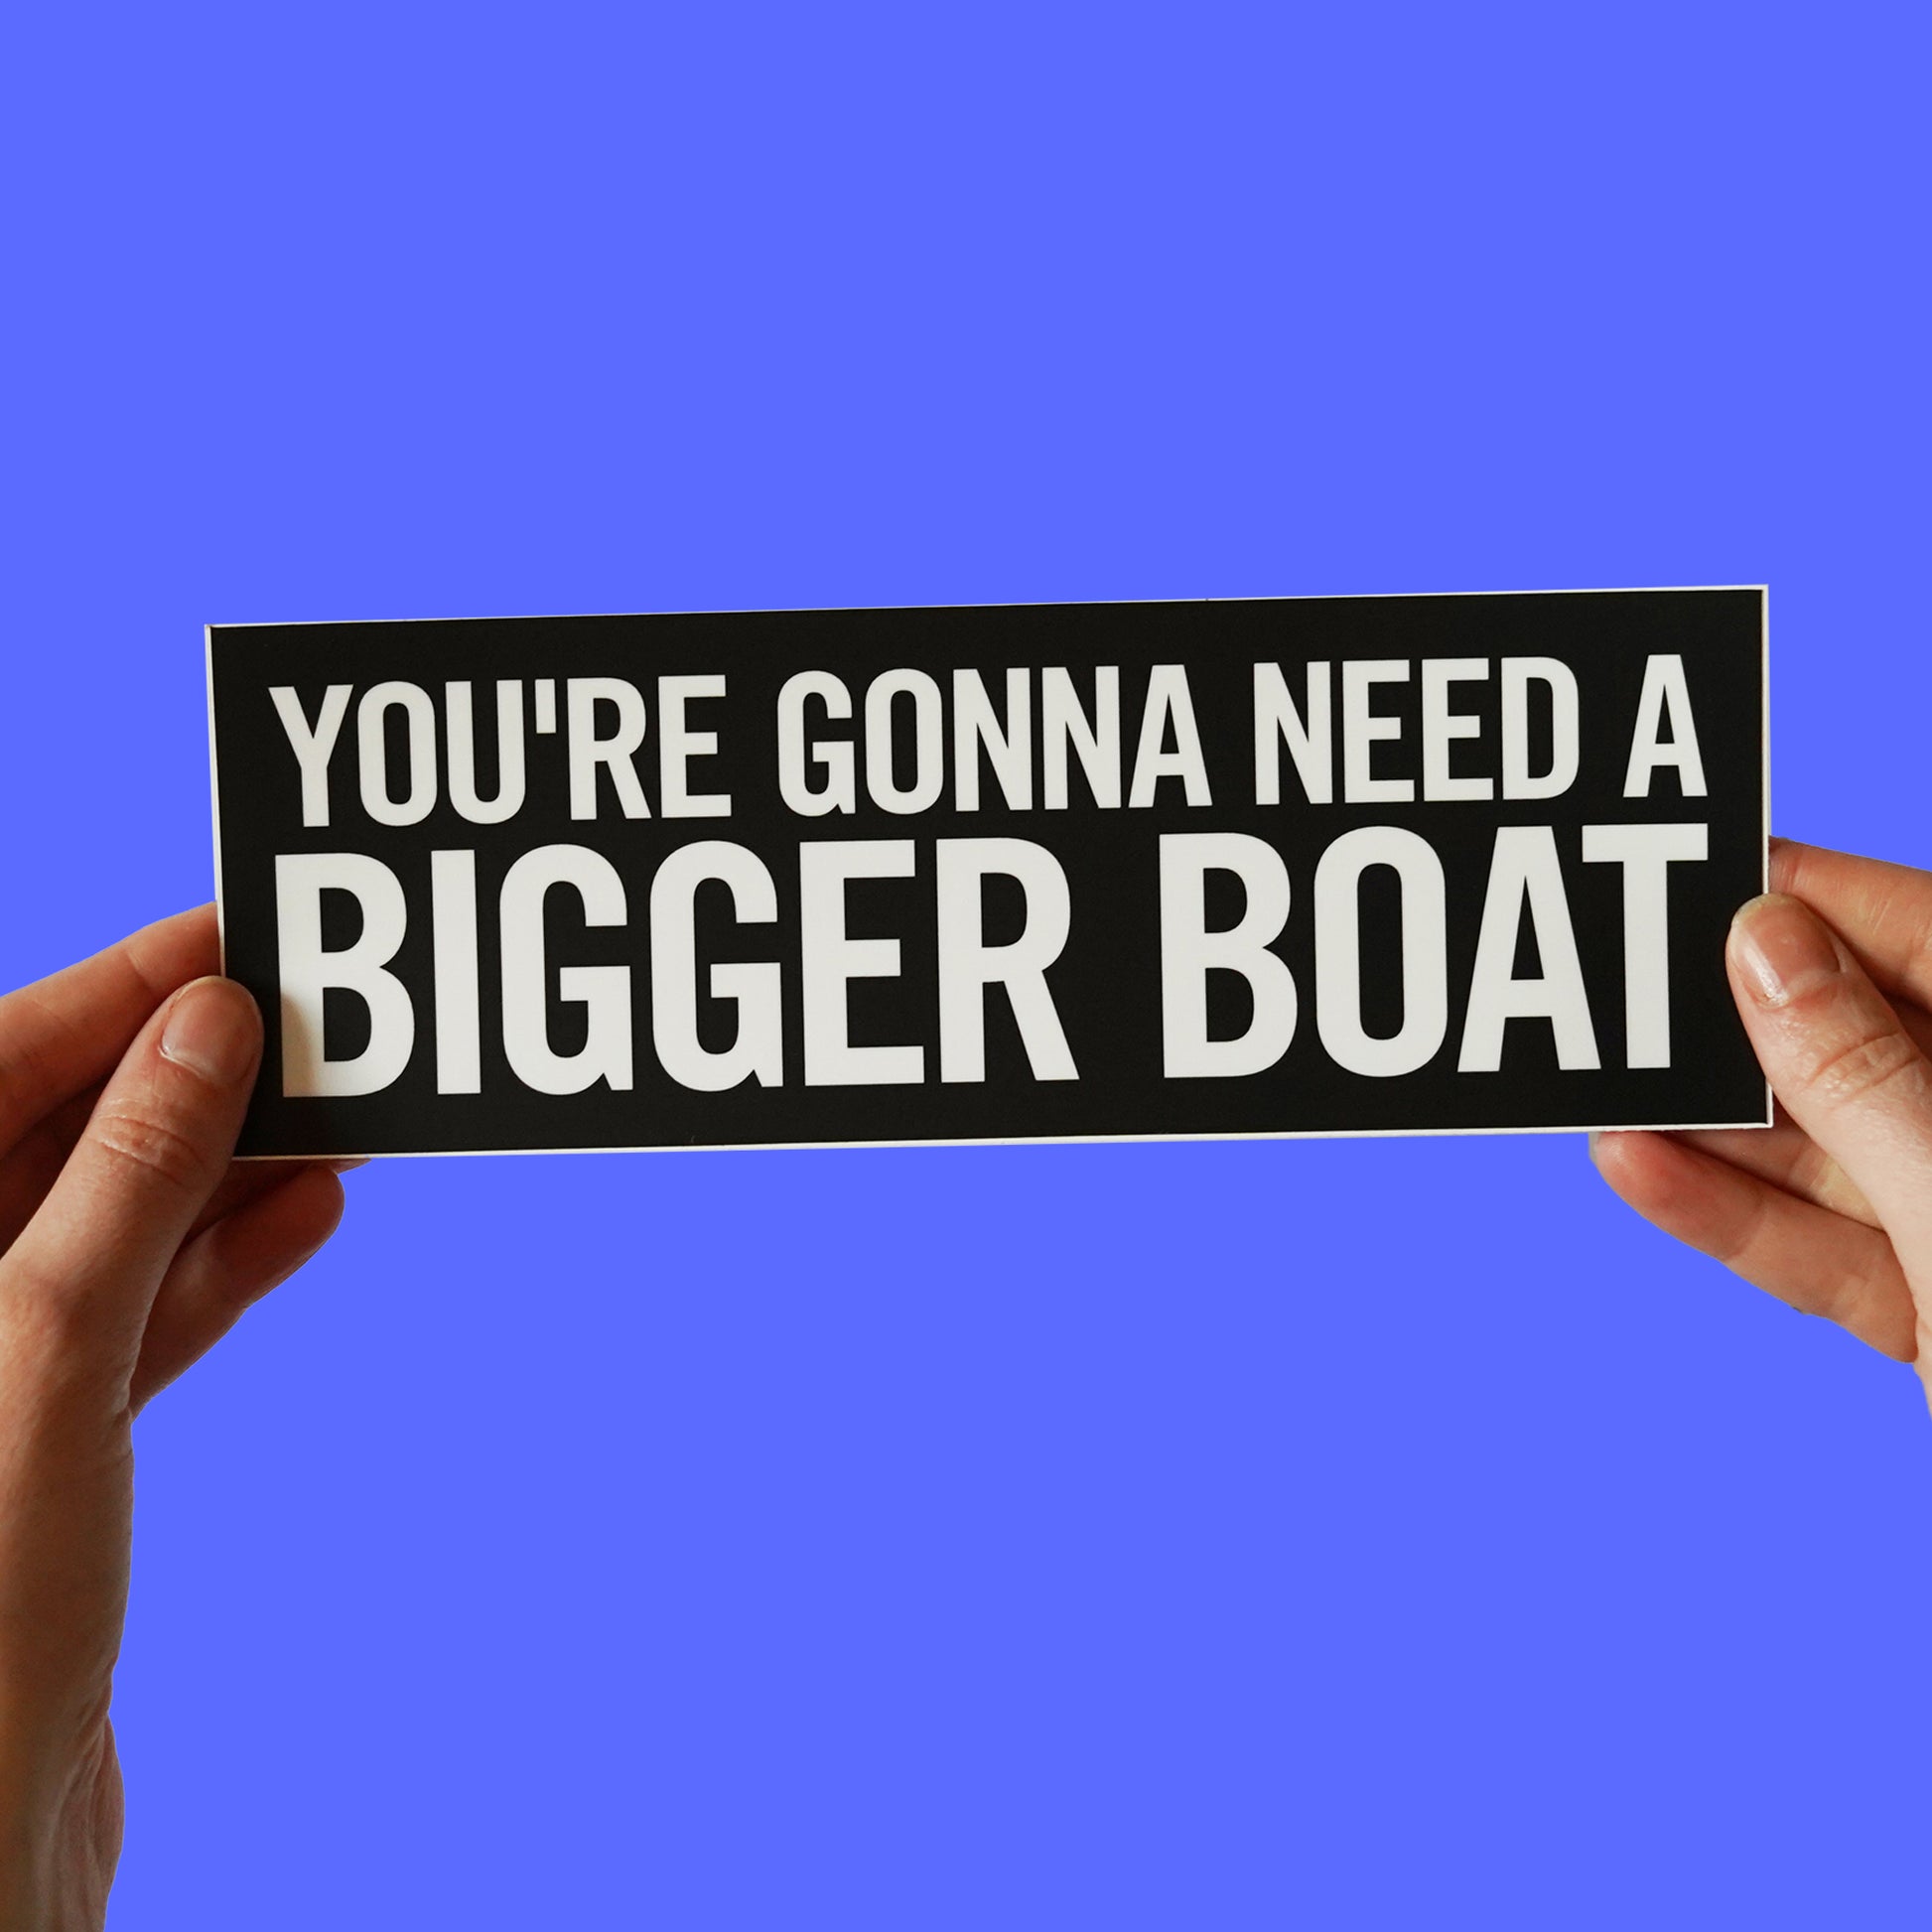 Jaws Quote Bumper Sticker "You're gonna need a bigger boat"